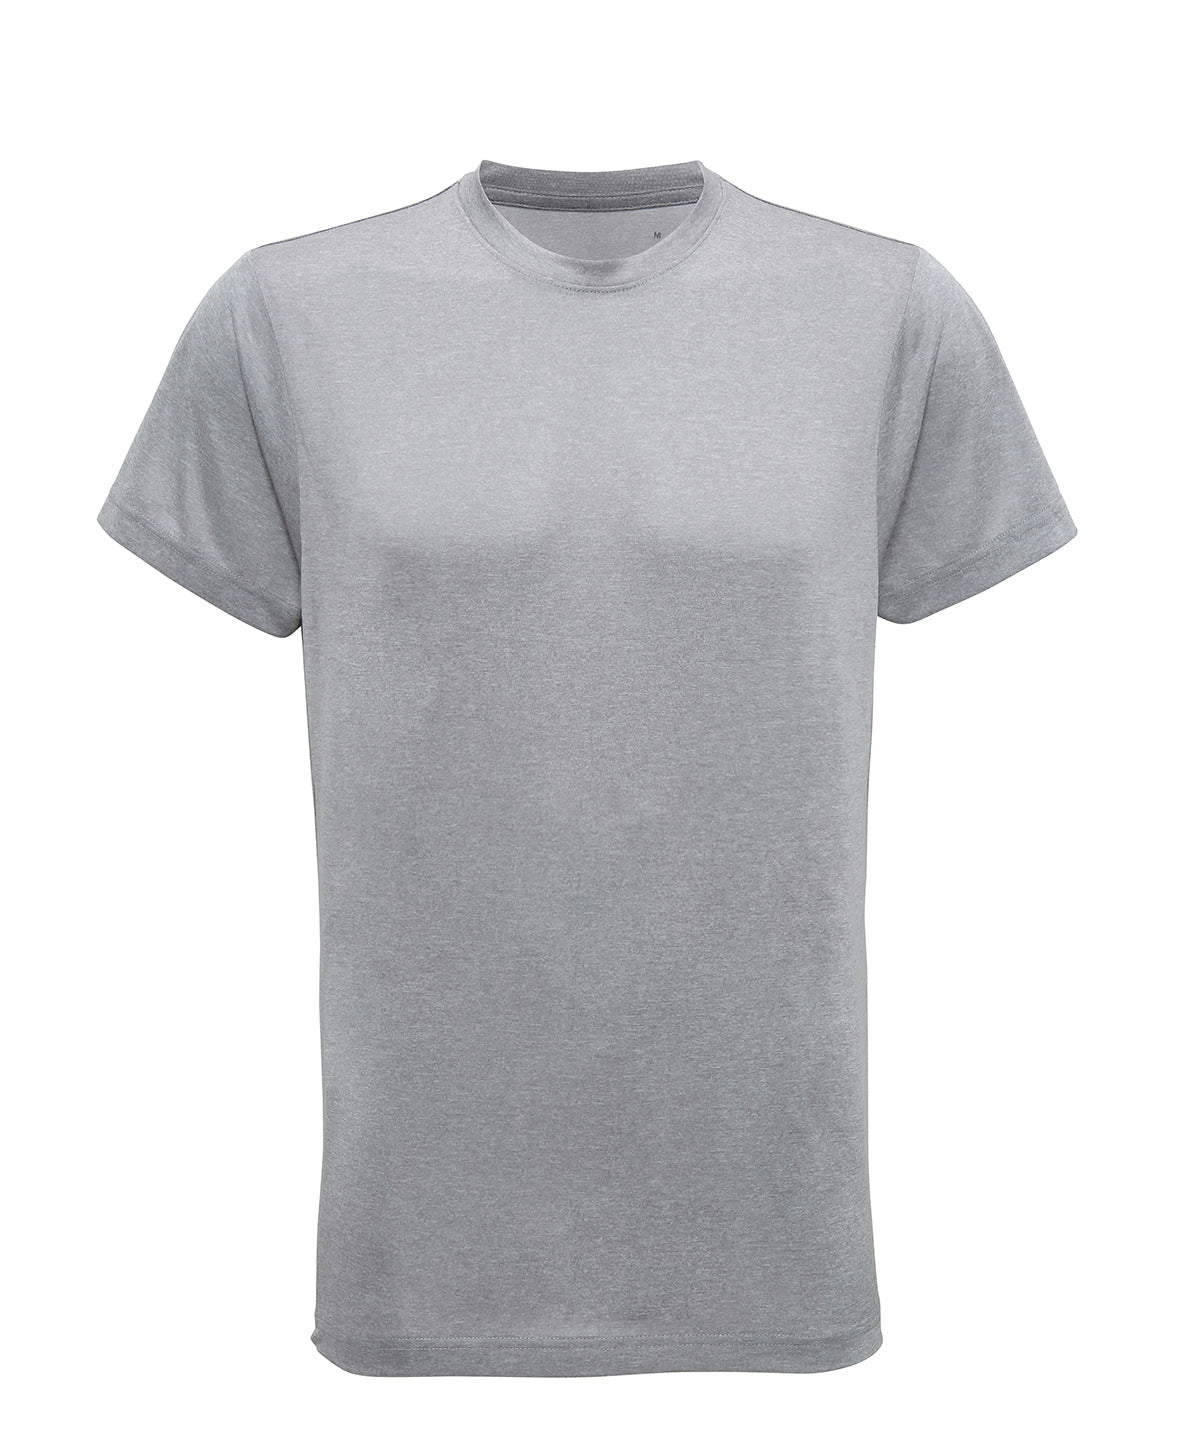 Recycled Performance T-Shirt (Mens/Unisex)